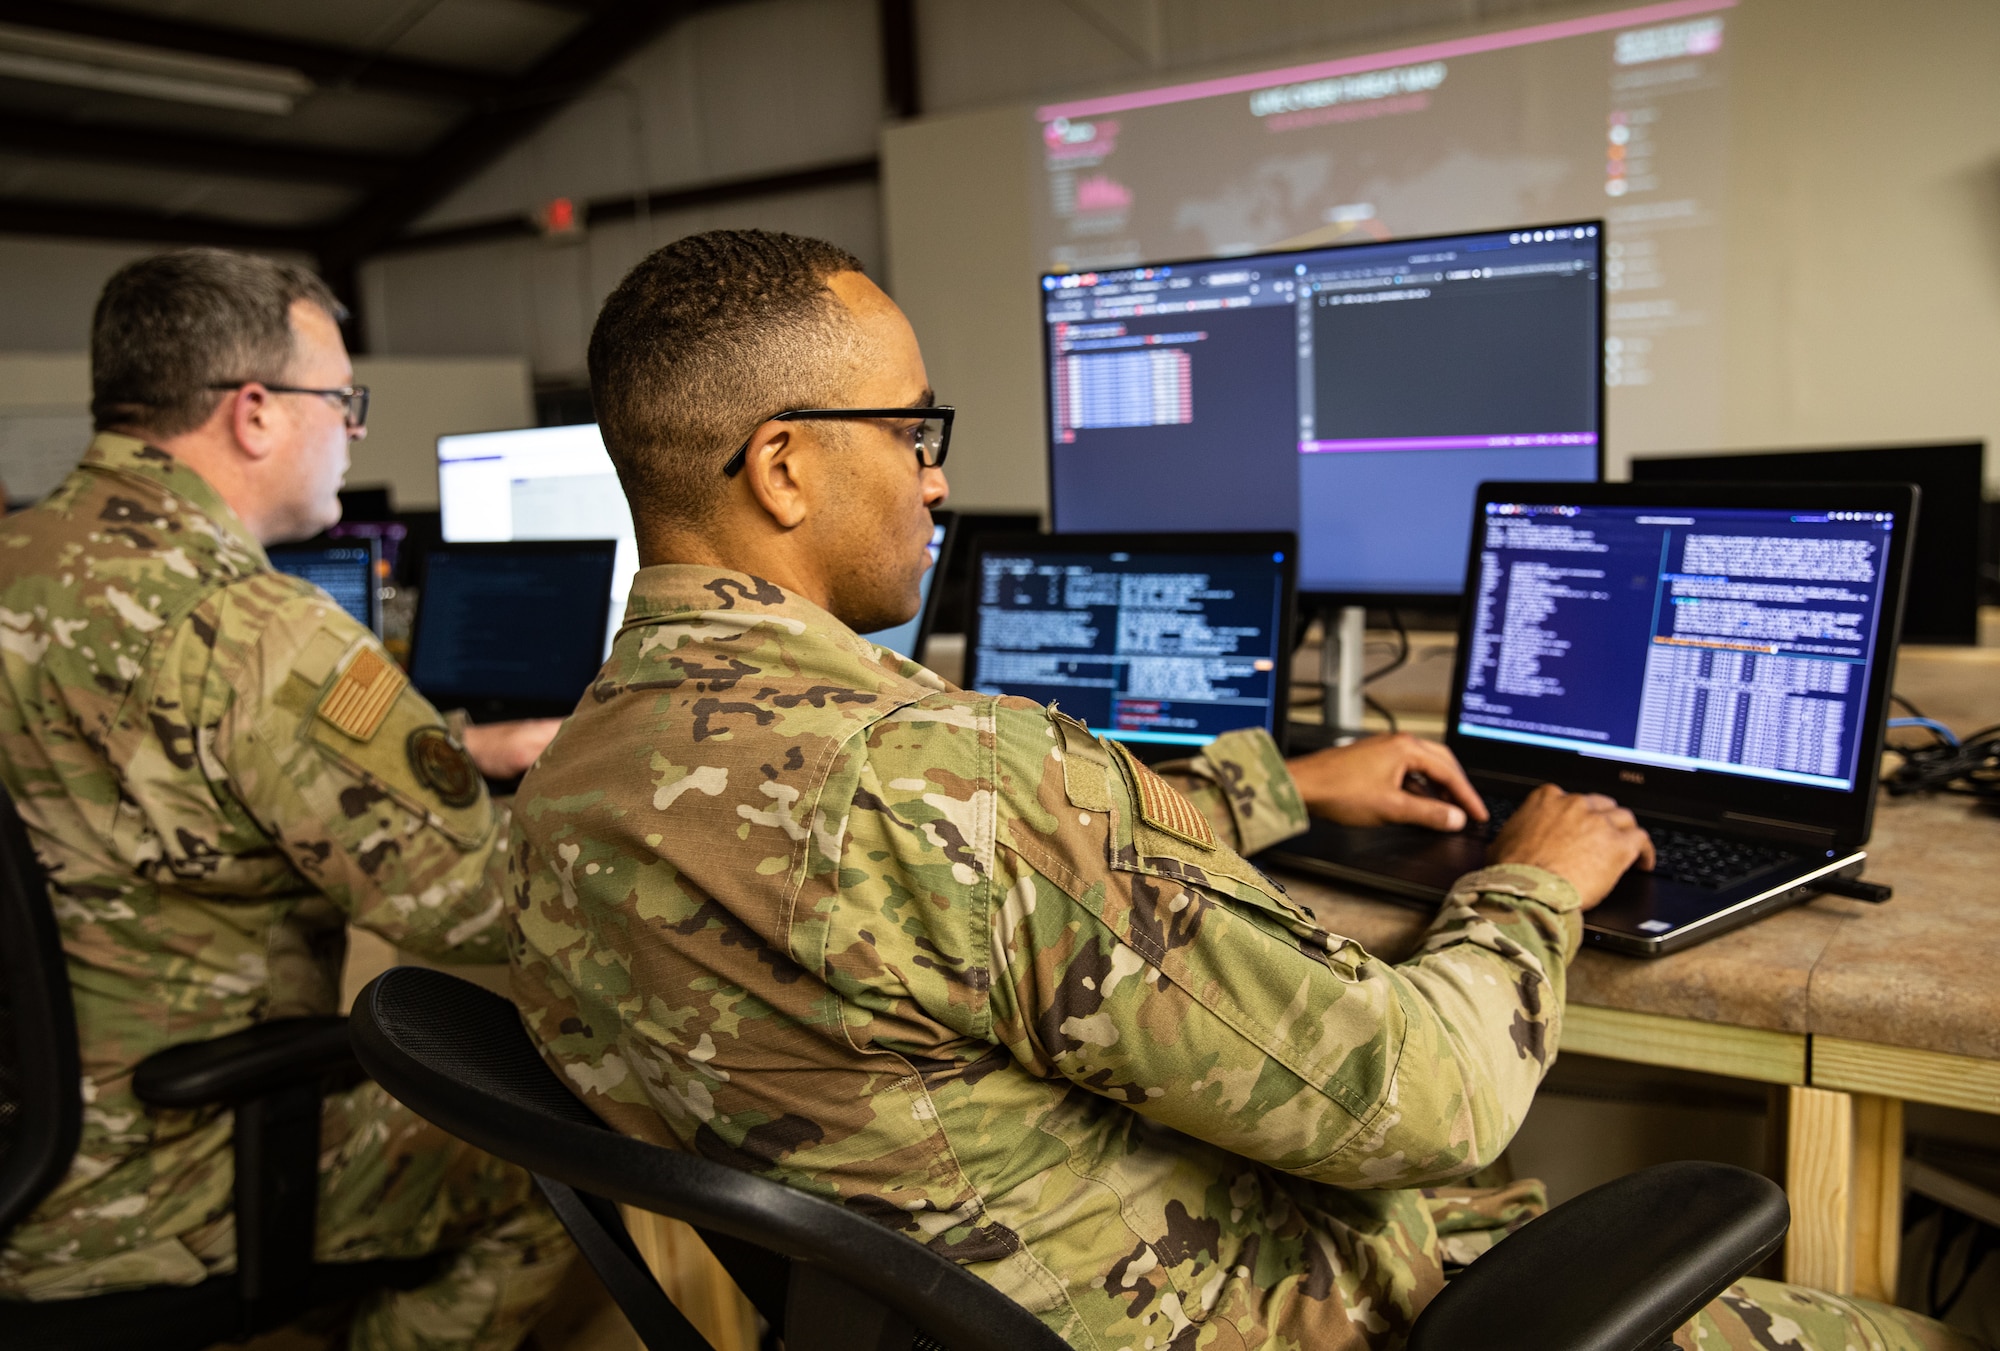 Airman 1st Class Gerald Mack, cyber operator with 175th Cyber Operations, Maryland Air National Guard, monitors cyber attacks during Exercise Southern Strike at Camp Shelby, Mississippi, April 21, 2023.